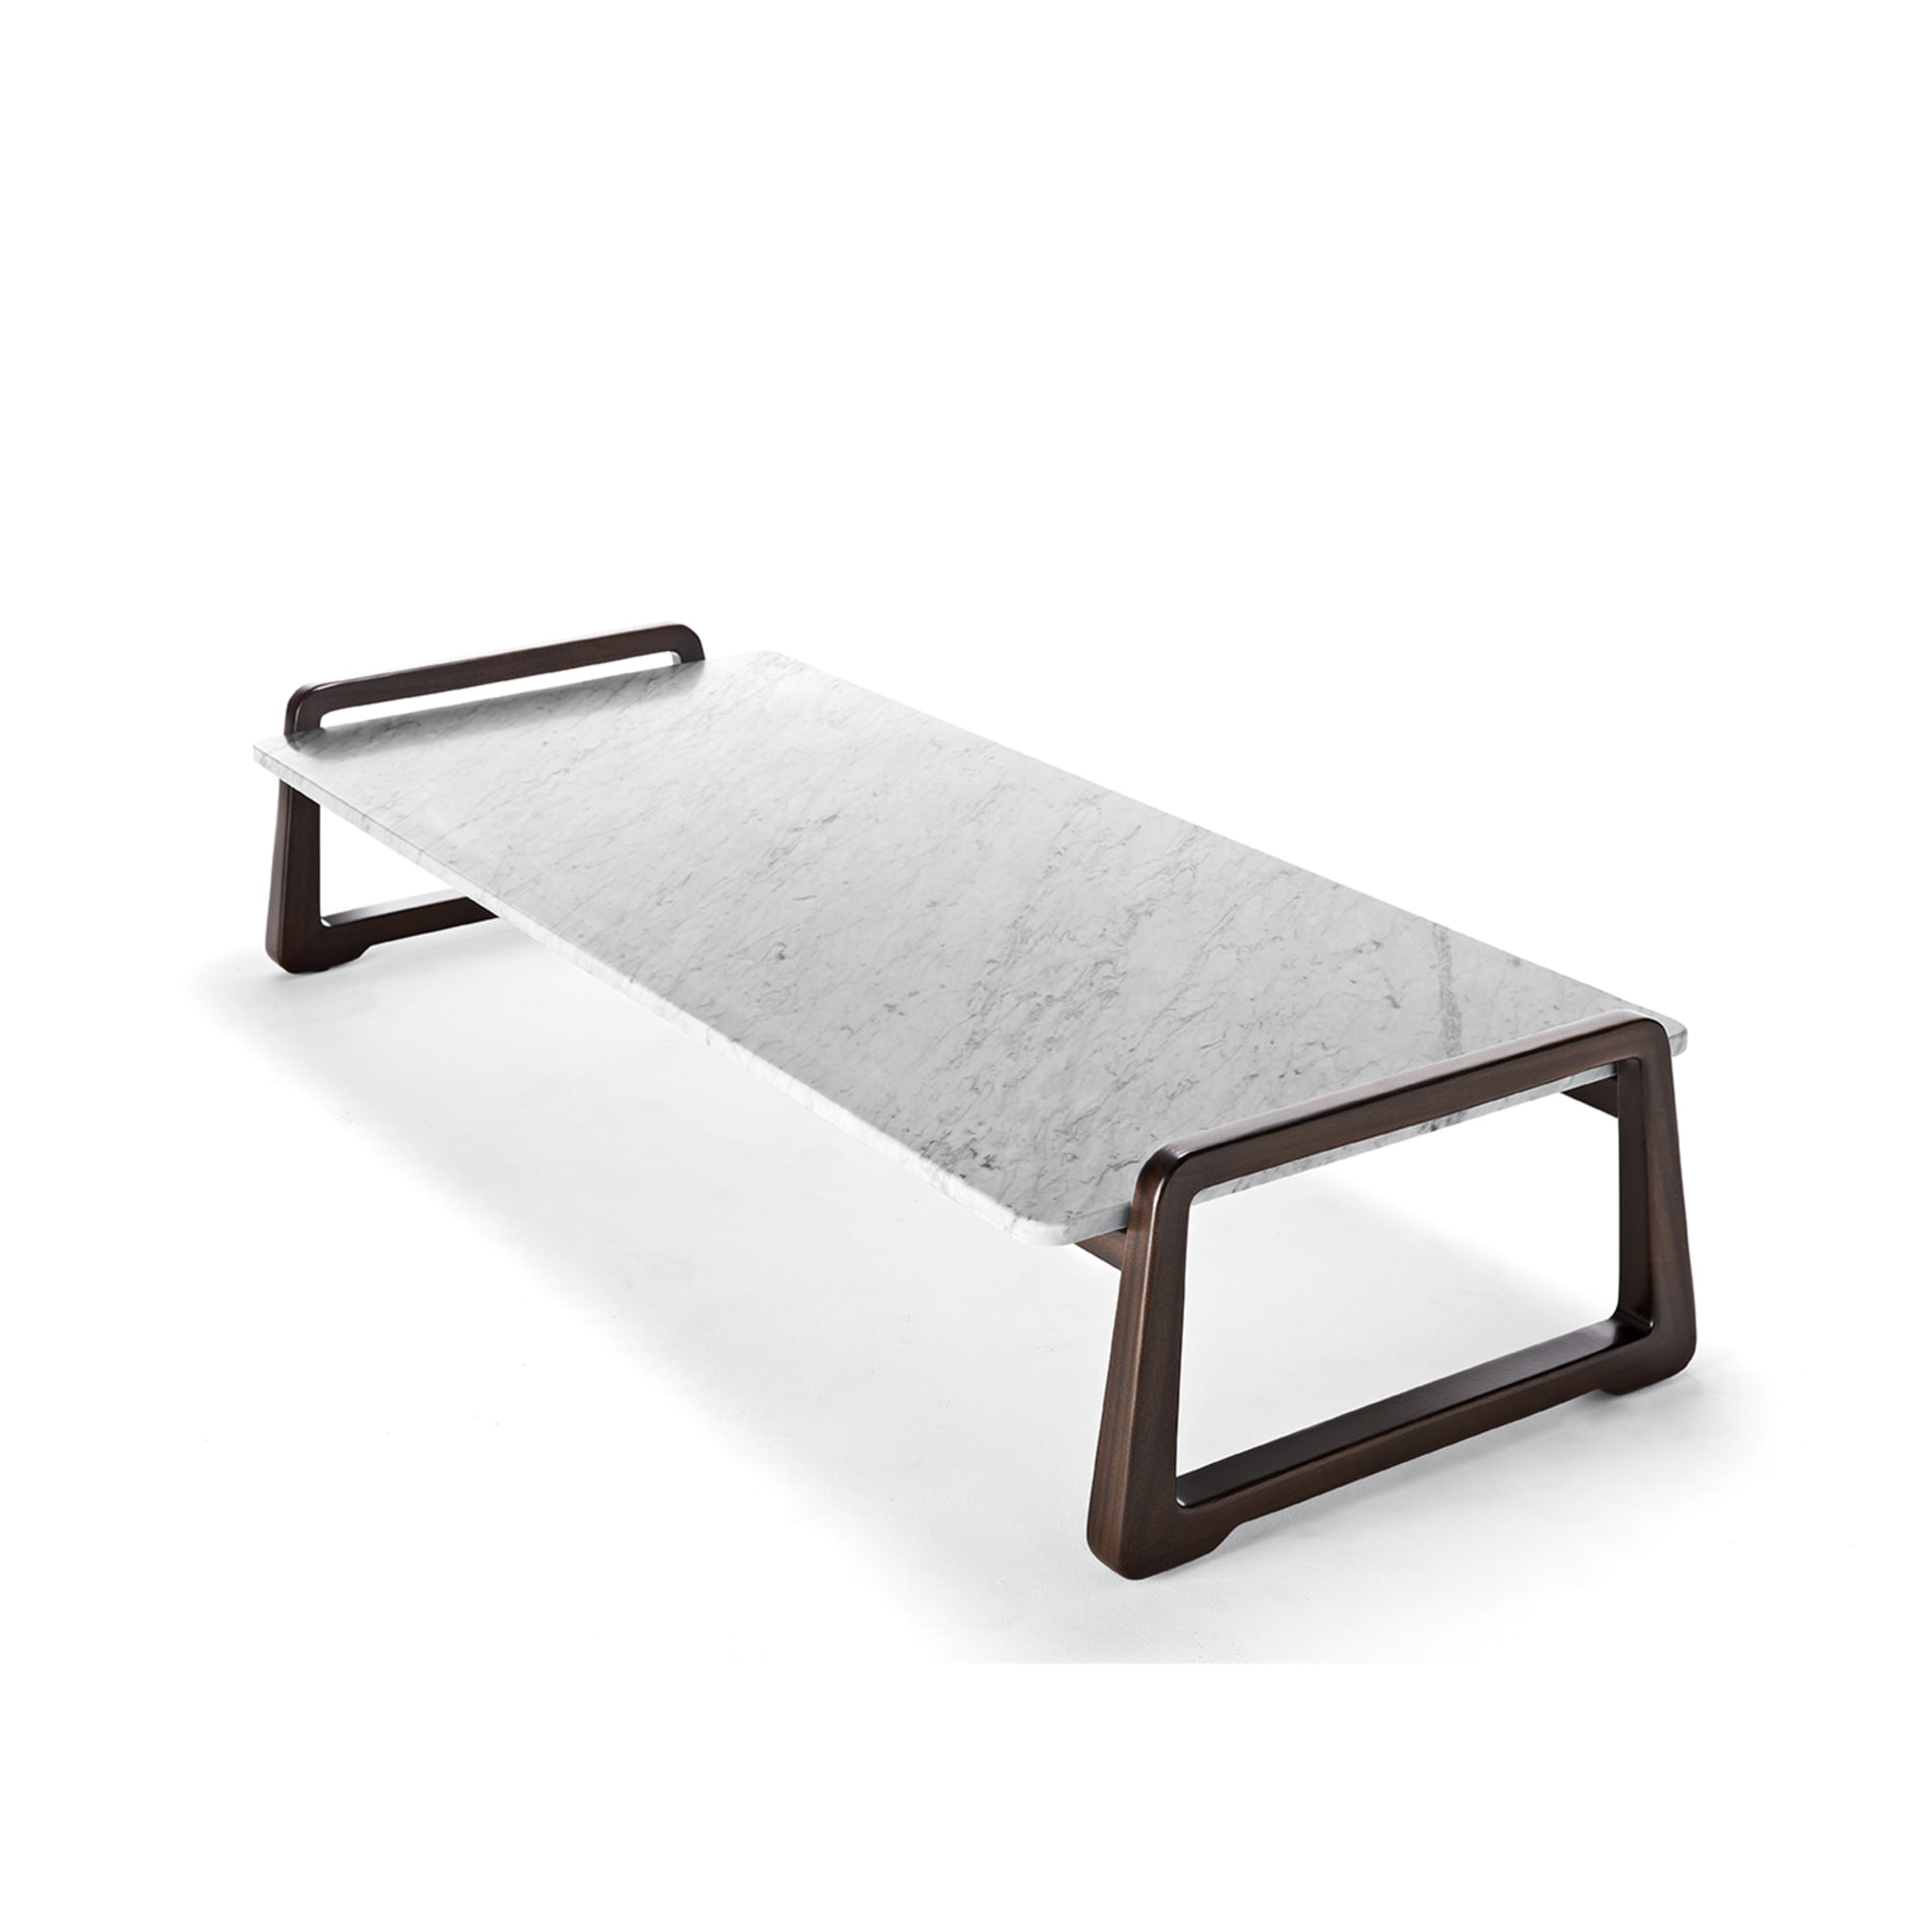 Sunset Rectangular Coffee Table by Paola Navone - Alternative view 3